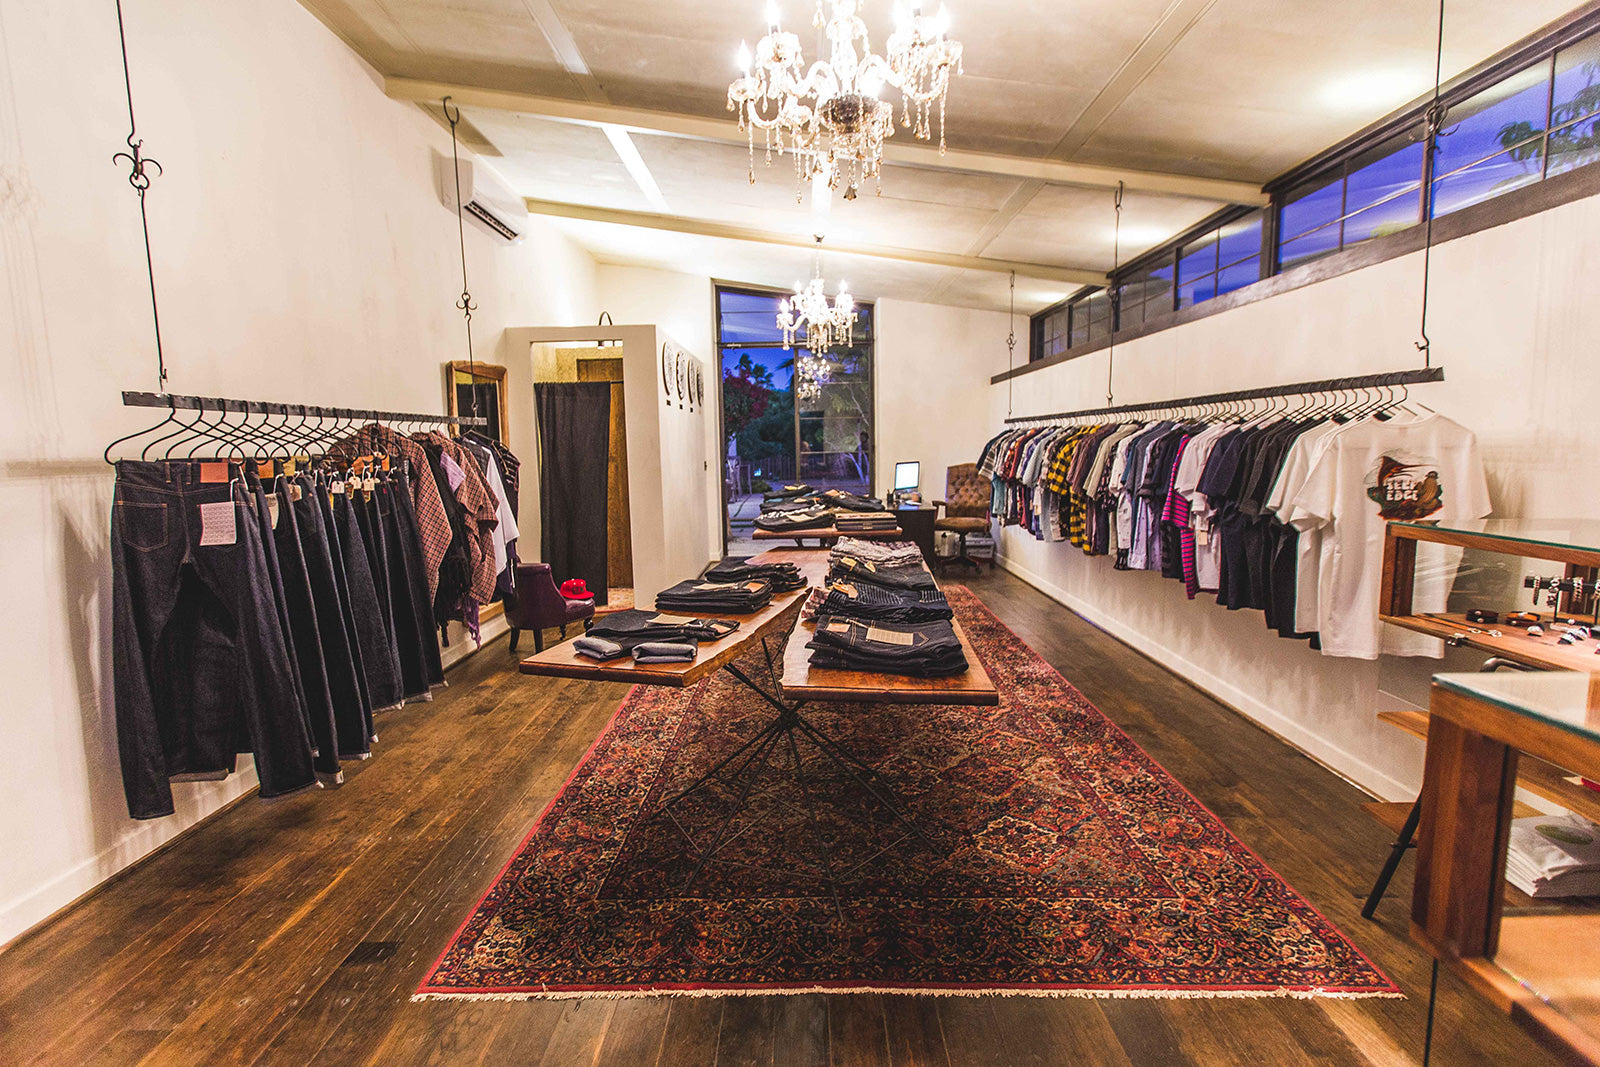 Inside view of Self Edge Mexico. Denim and other goods are on display.